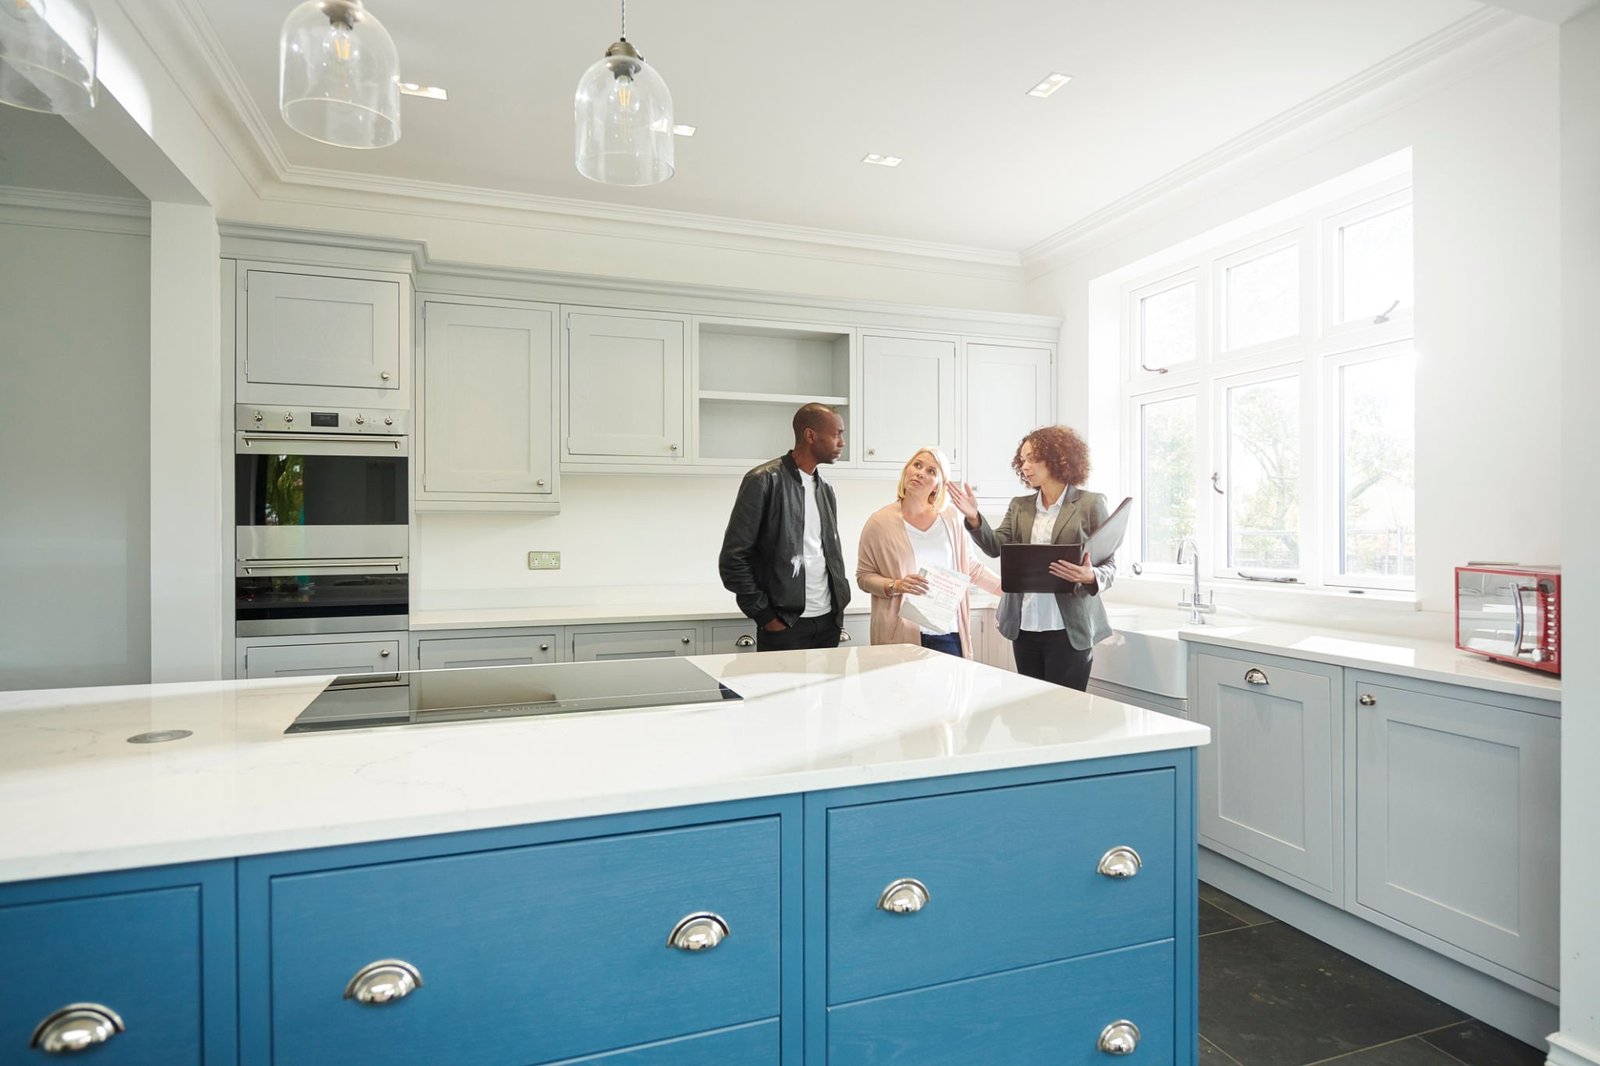 a saleswoman shows a couple around a home with new kitchen